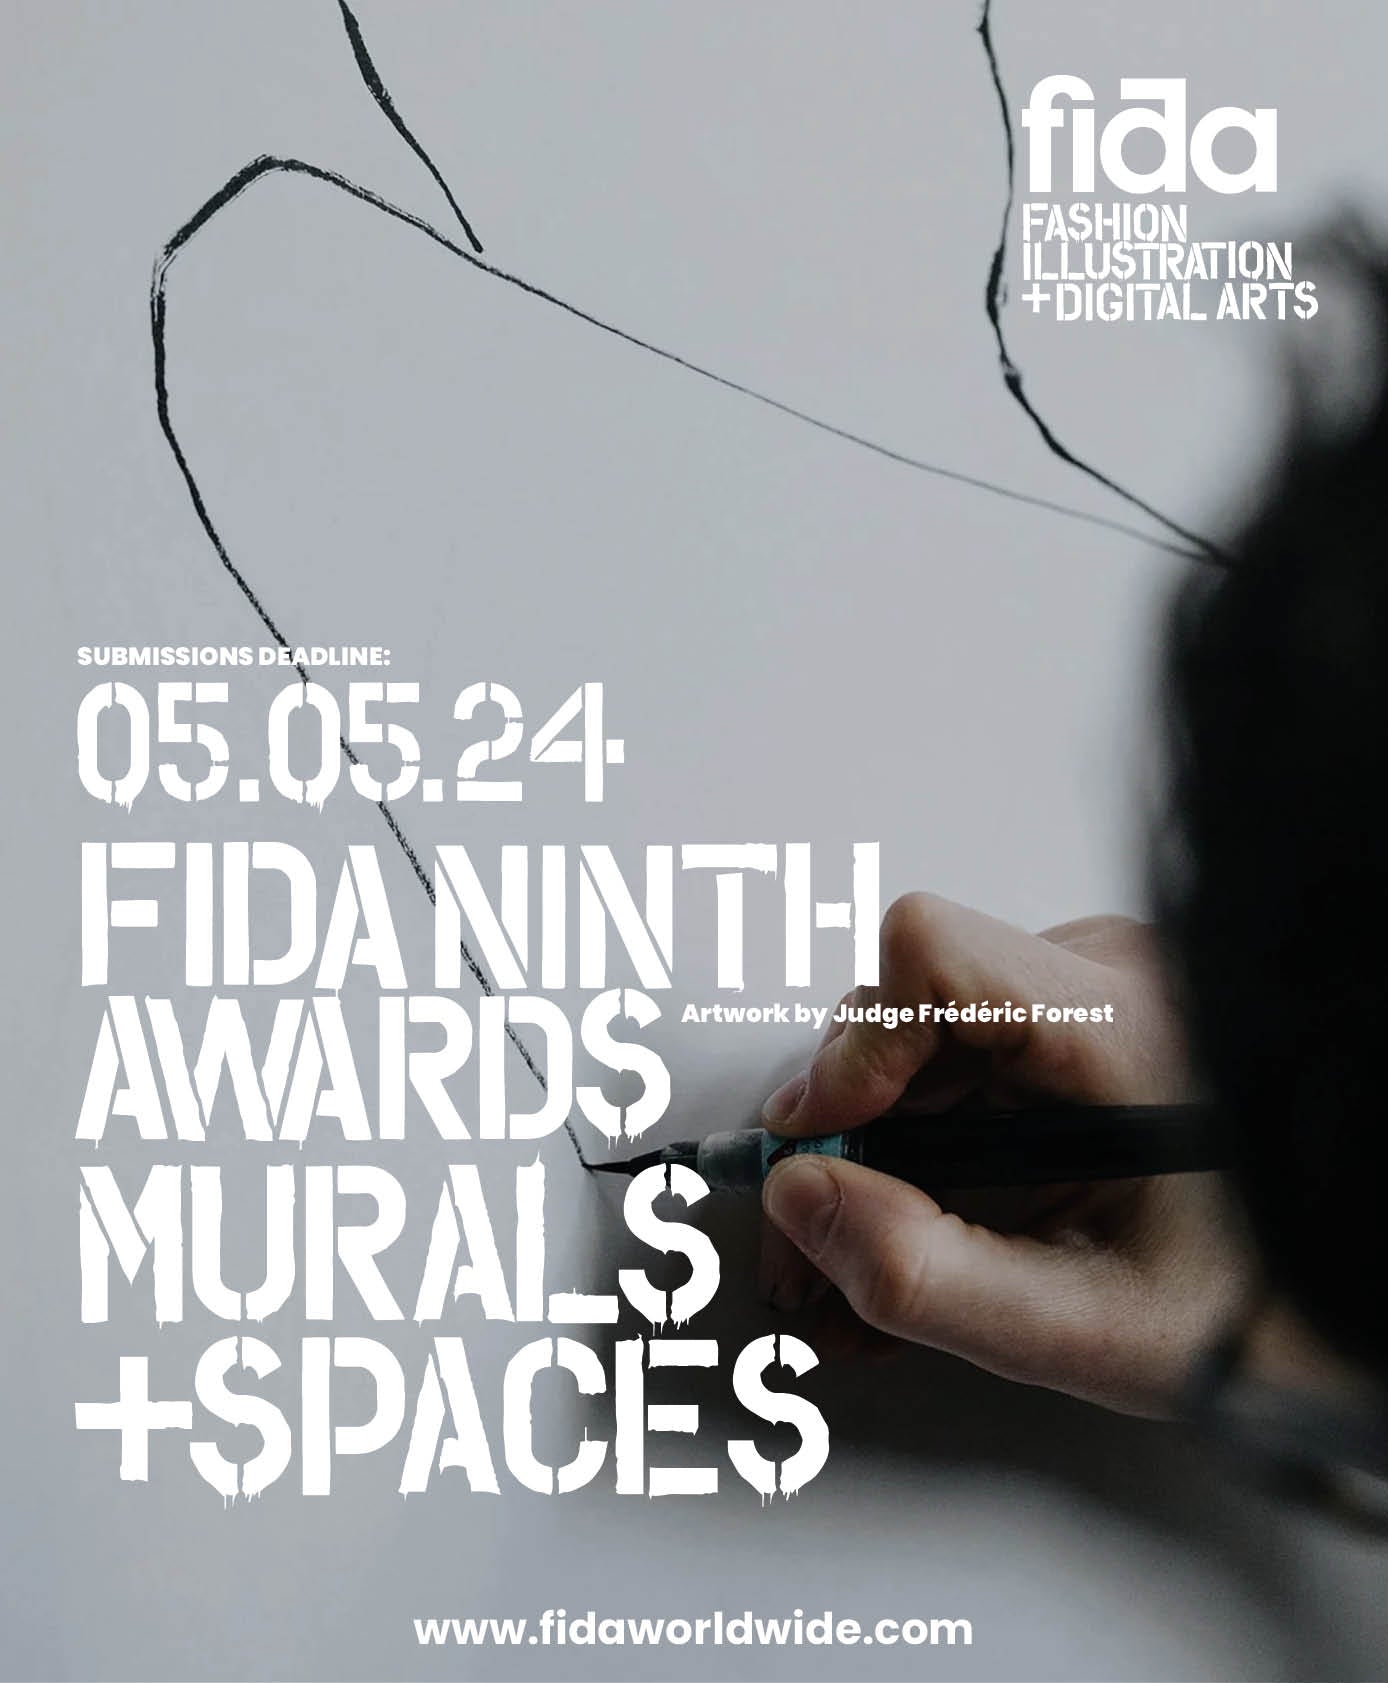 The Mural and Spaces Award